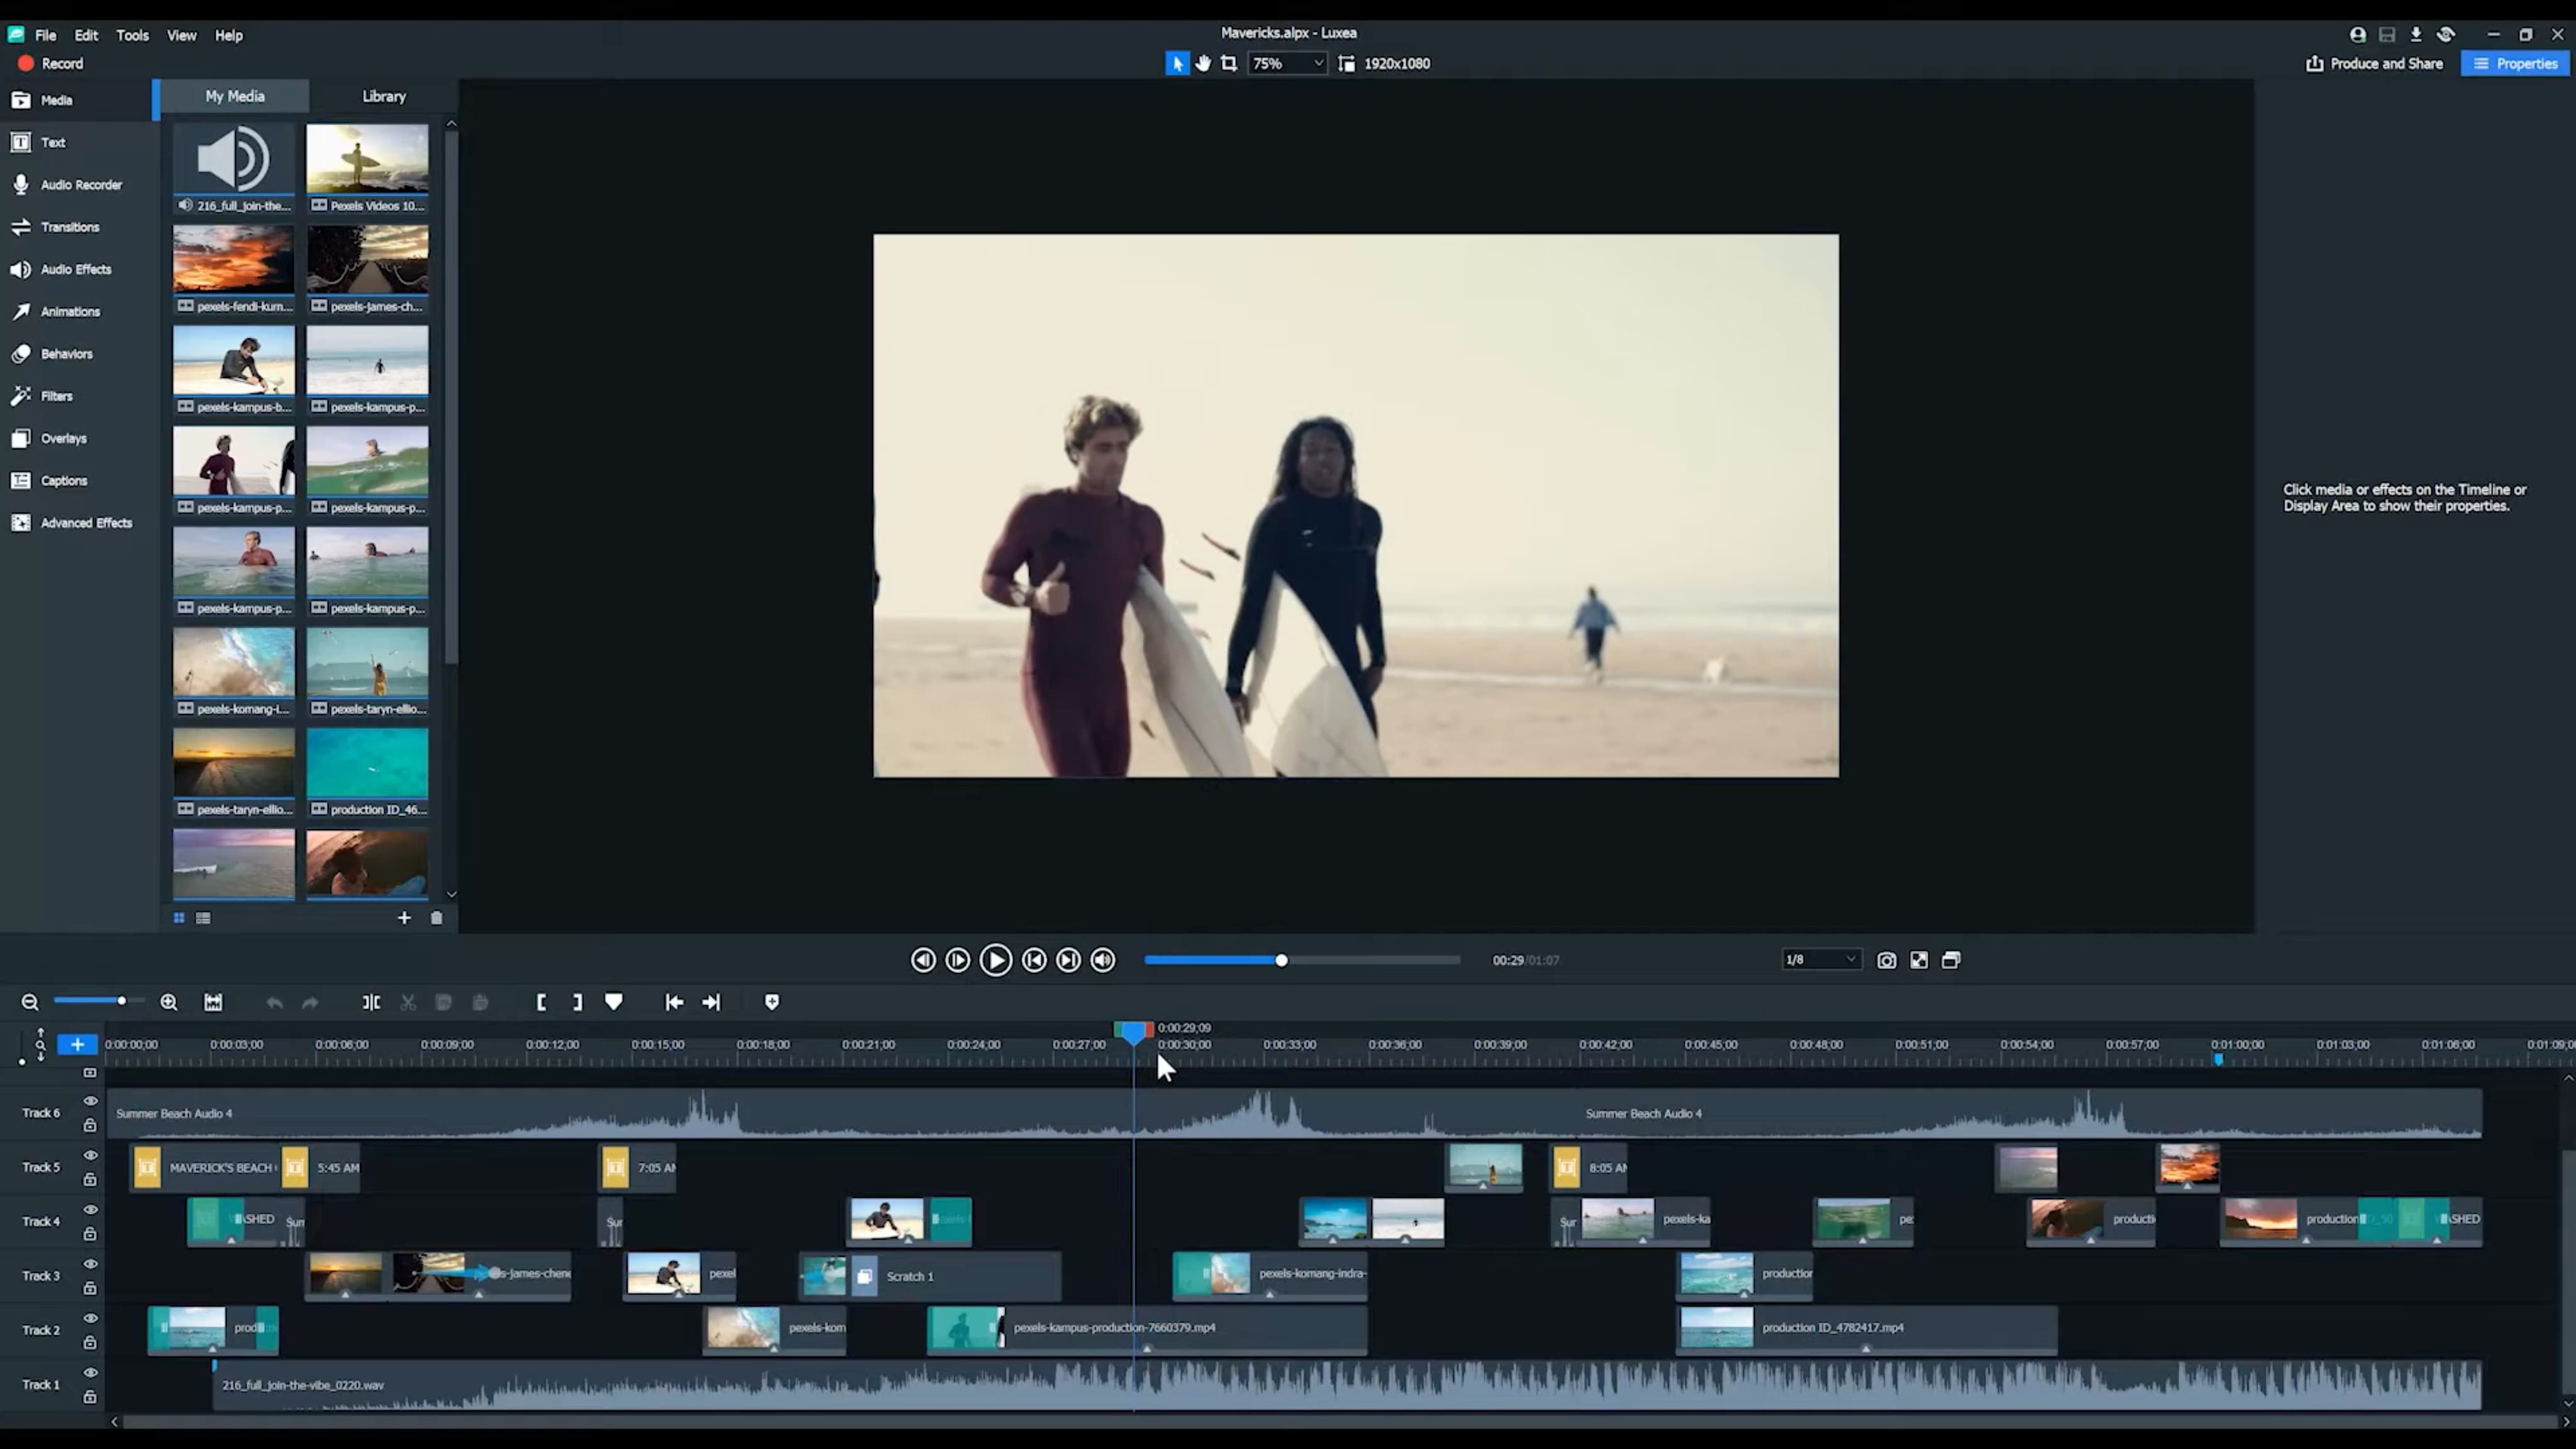 ACDSee Luxea Video Editor 7.1.2.2399 for windows instal